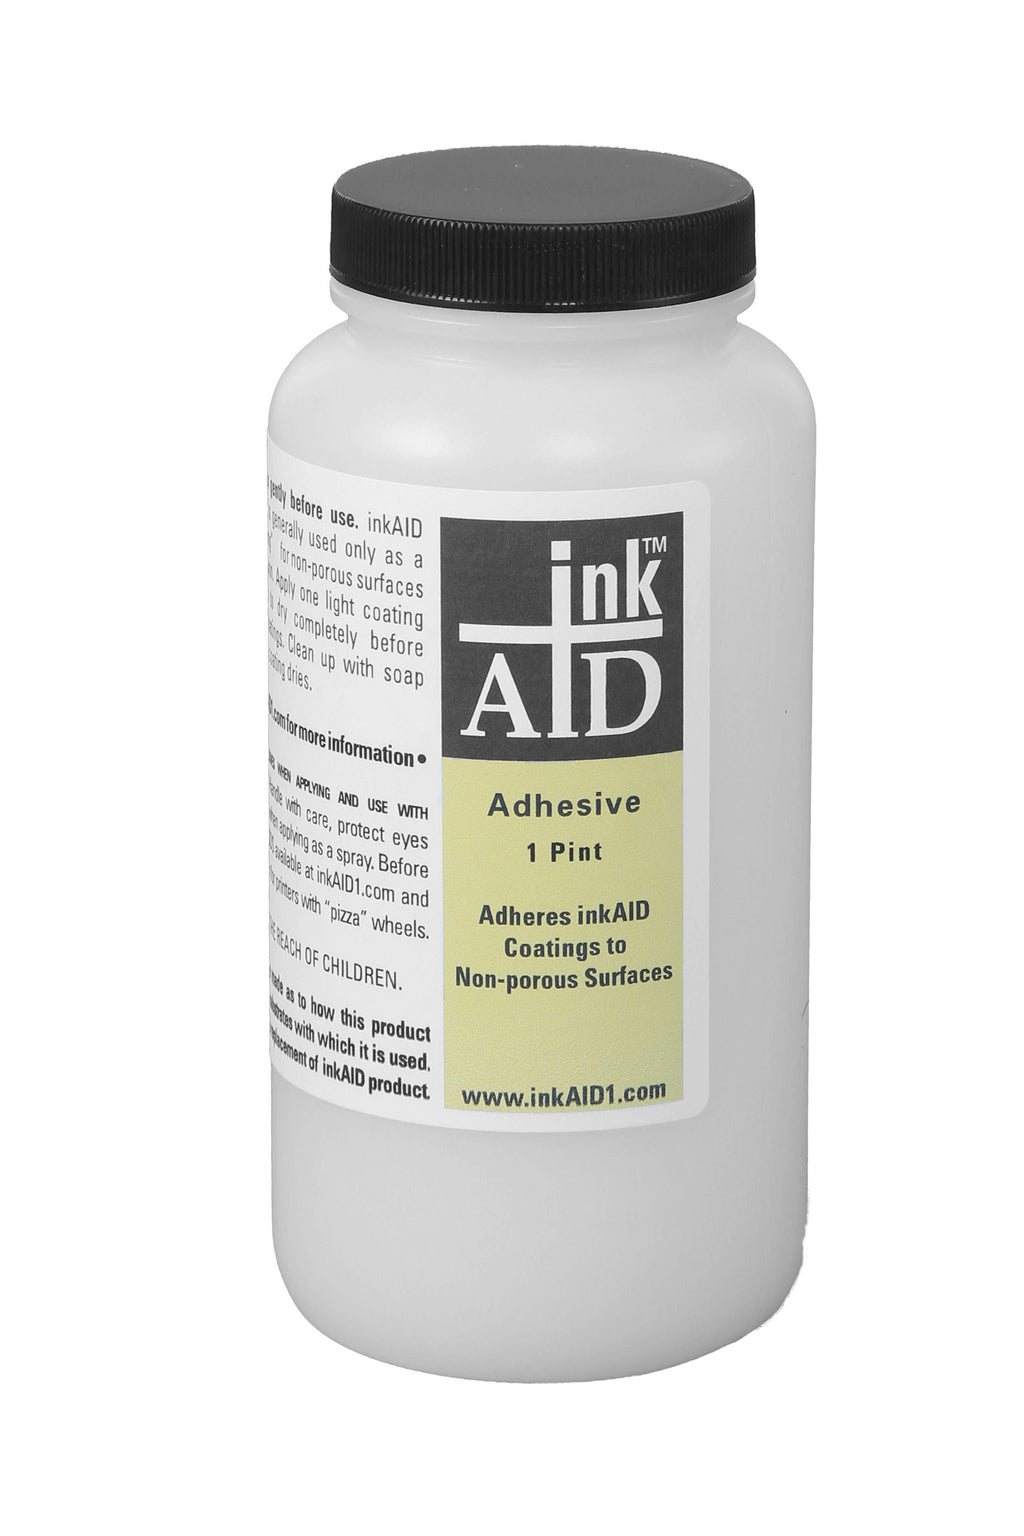 inkAID Adhesive Primer used as a primer coating under inkjet and ink receptive coatings for inkjet printing. To increase adhesion to some materials.  